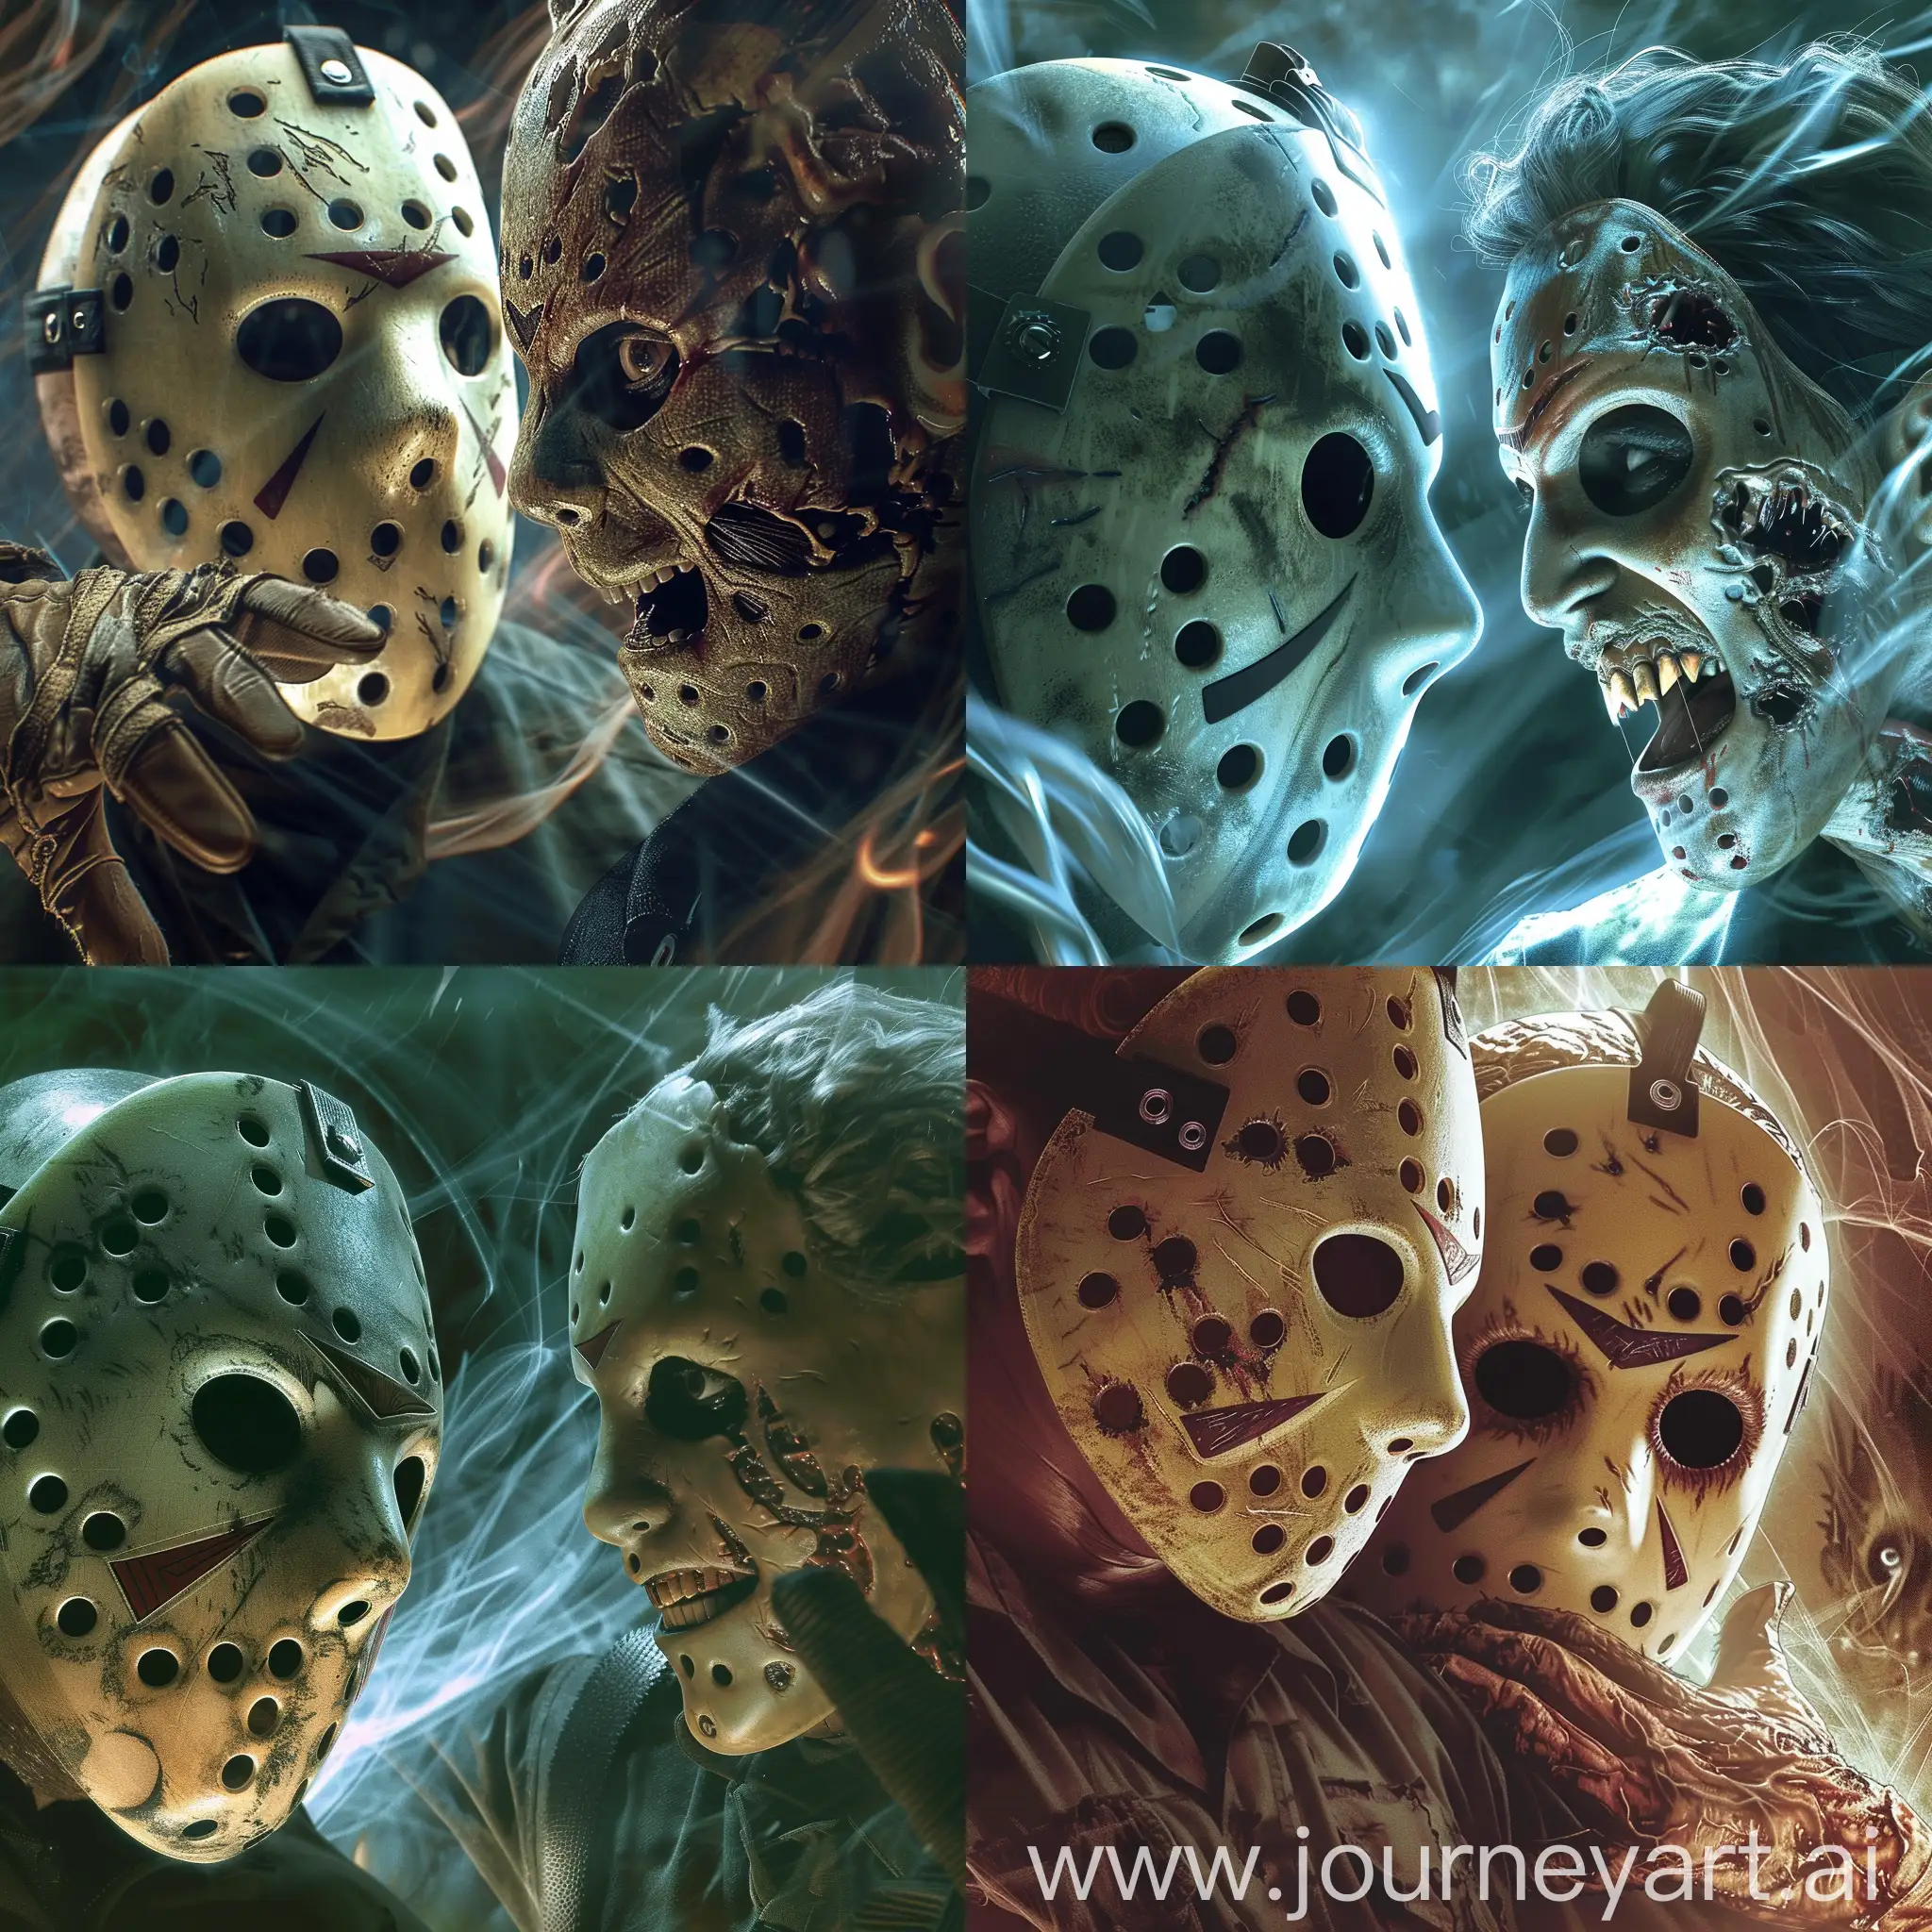 Horror-Icons-Jason-Voorhees-and-Freddy-Krueger-Face-Off-in-Intense-Confrontation